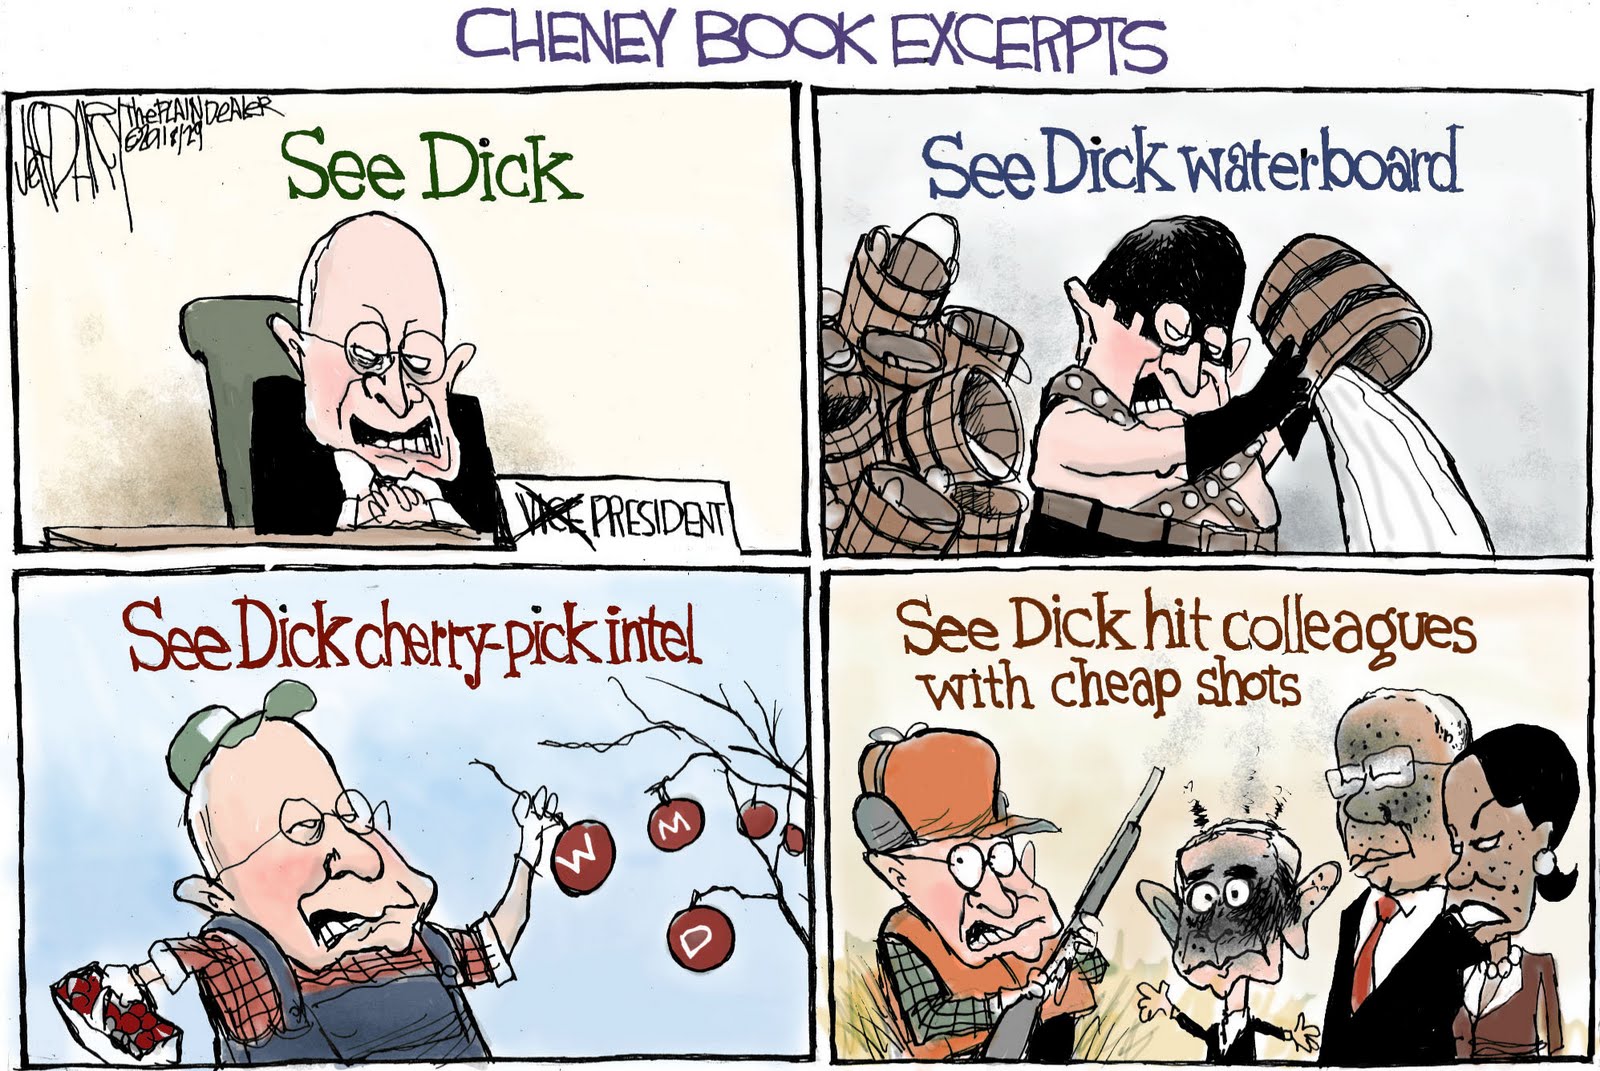 Dick cheney real name